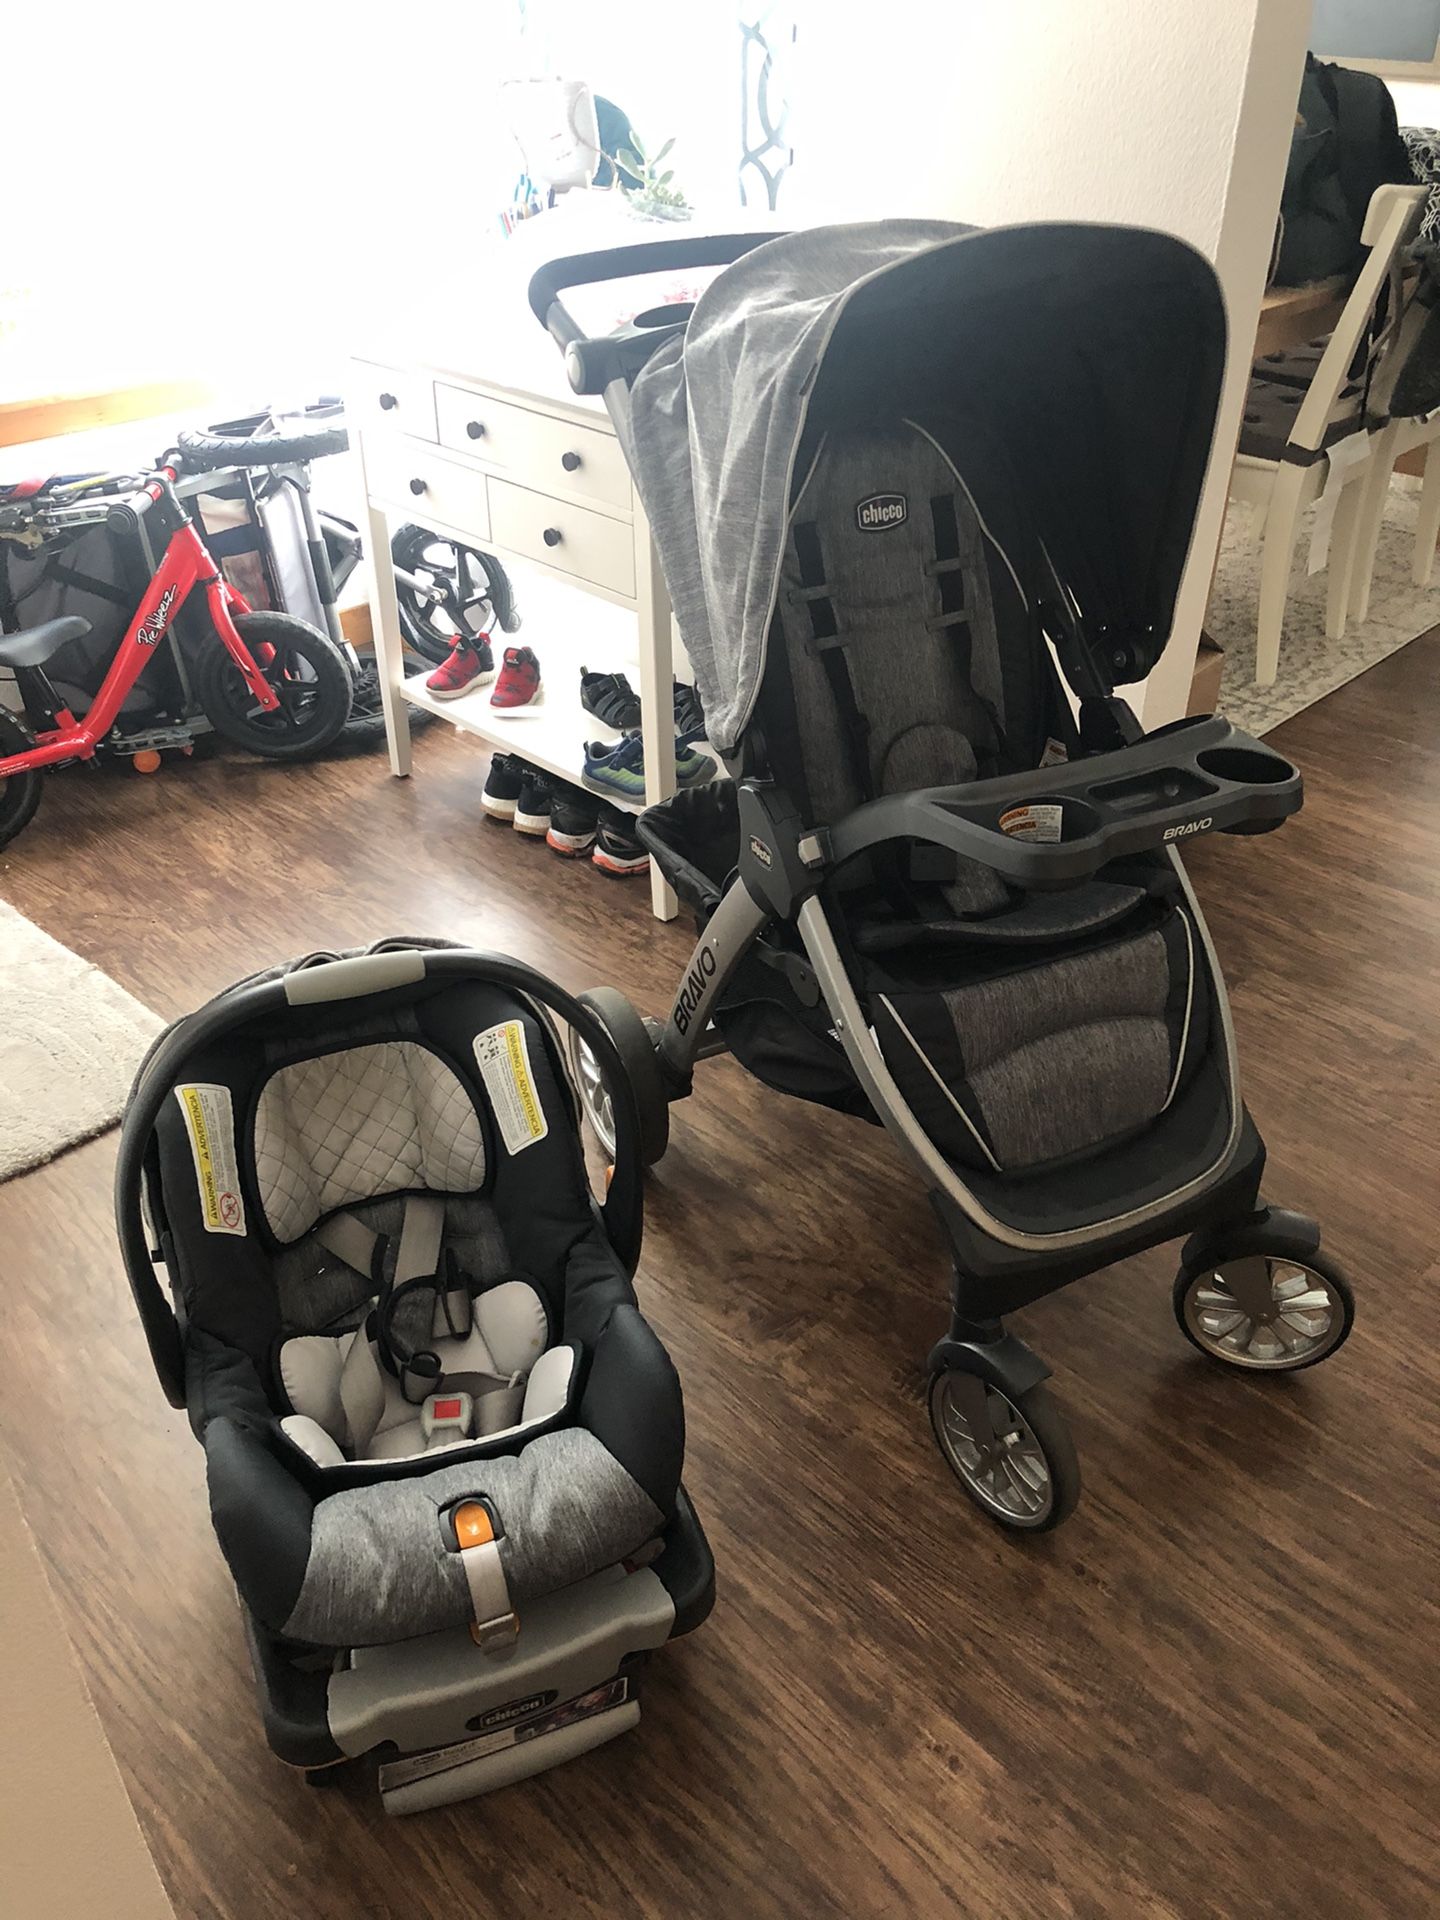 Graco keyfit 30 trio car seat/stroller and base